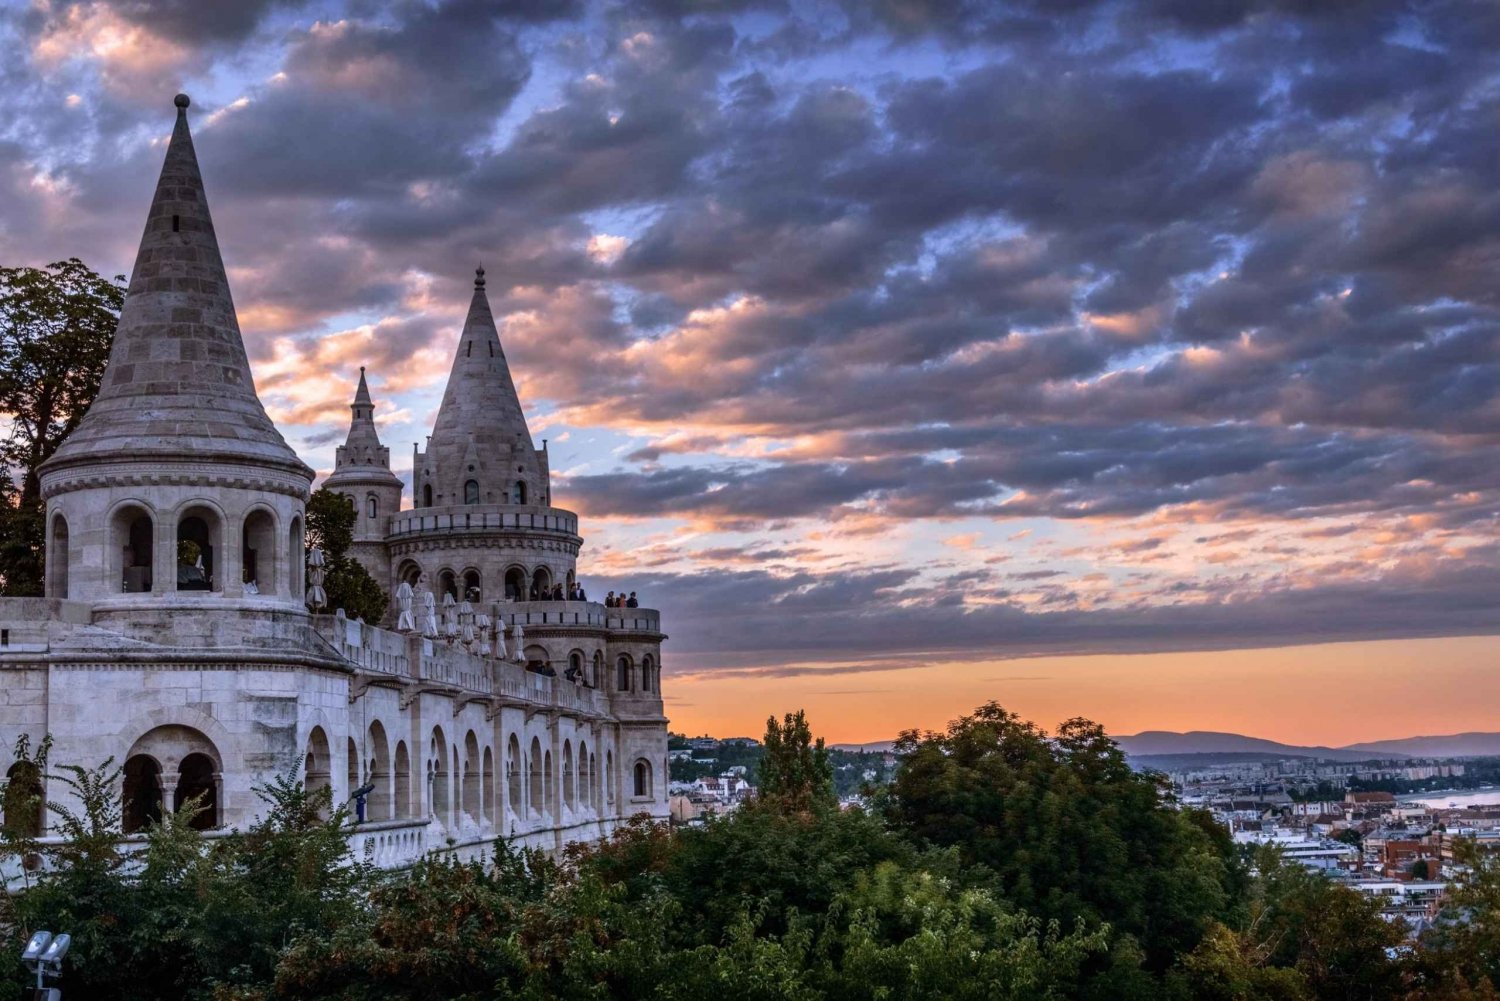 Budapest in a Day Private Luxury Sightseeing Tour